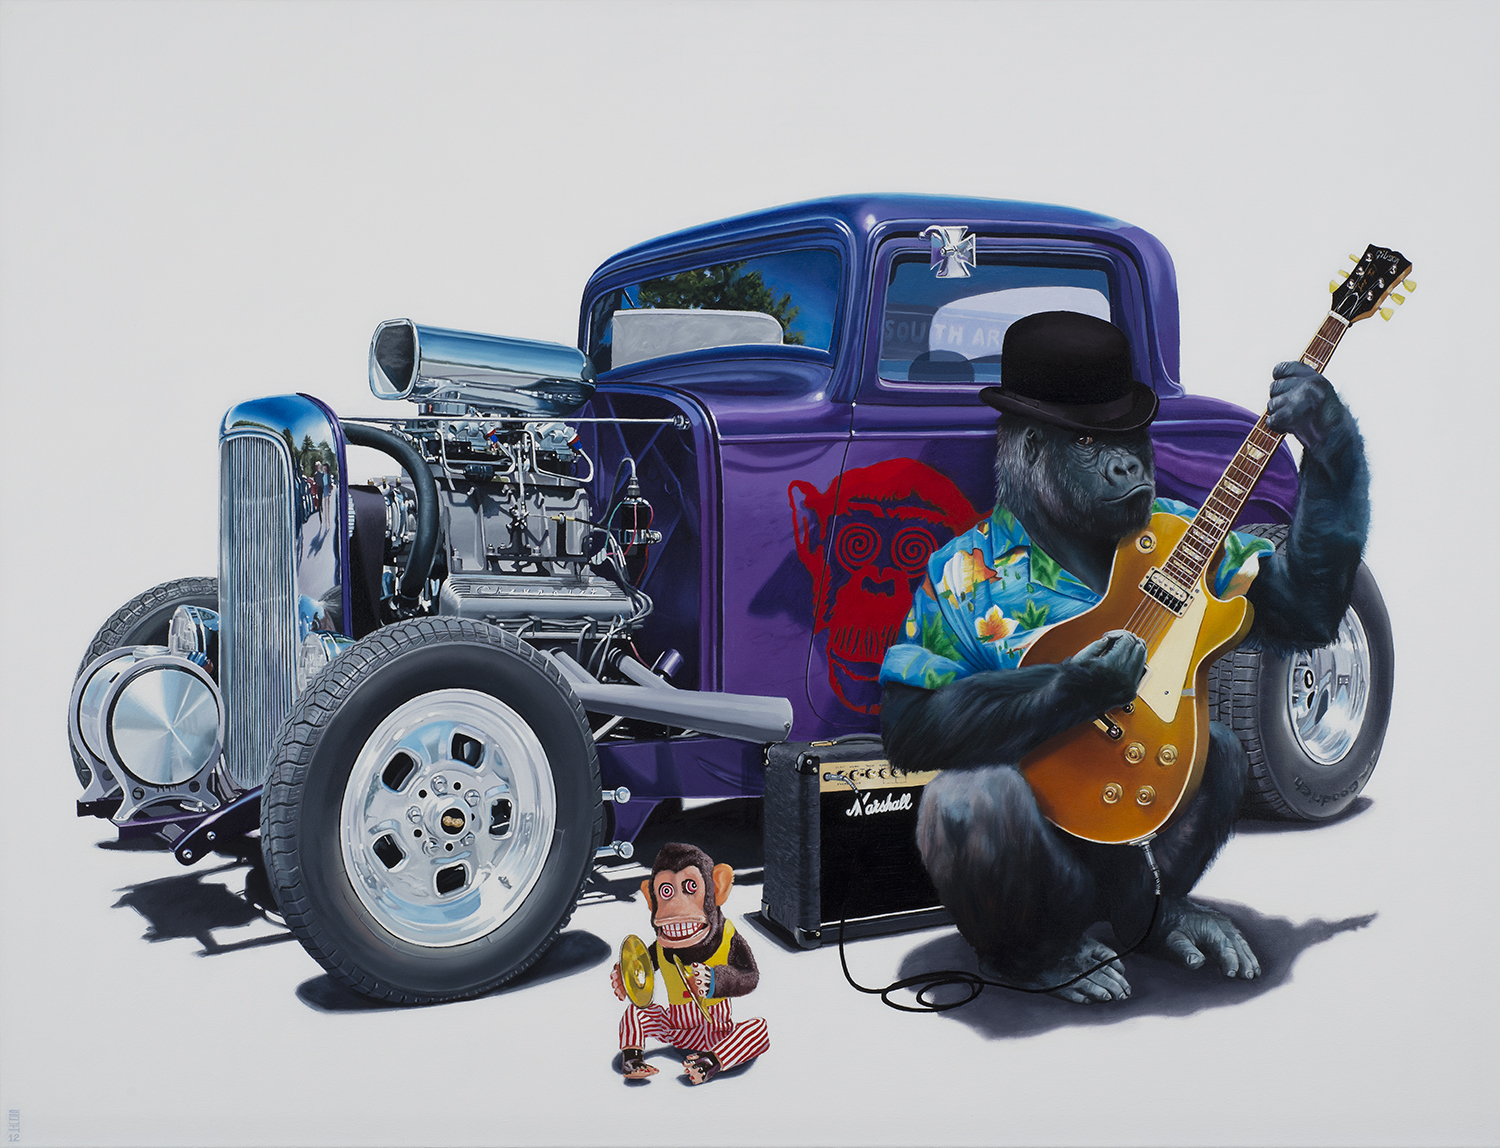 A gorilla playing the guitar while seated in front of a hot rod - Tony South - The Soothing (of the Savage Beast)